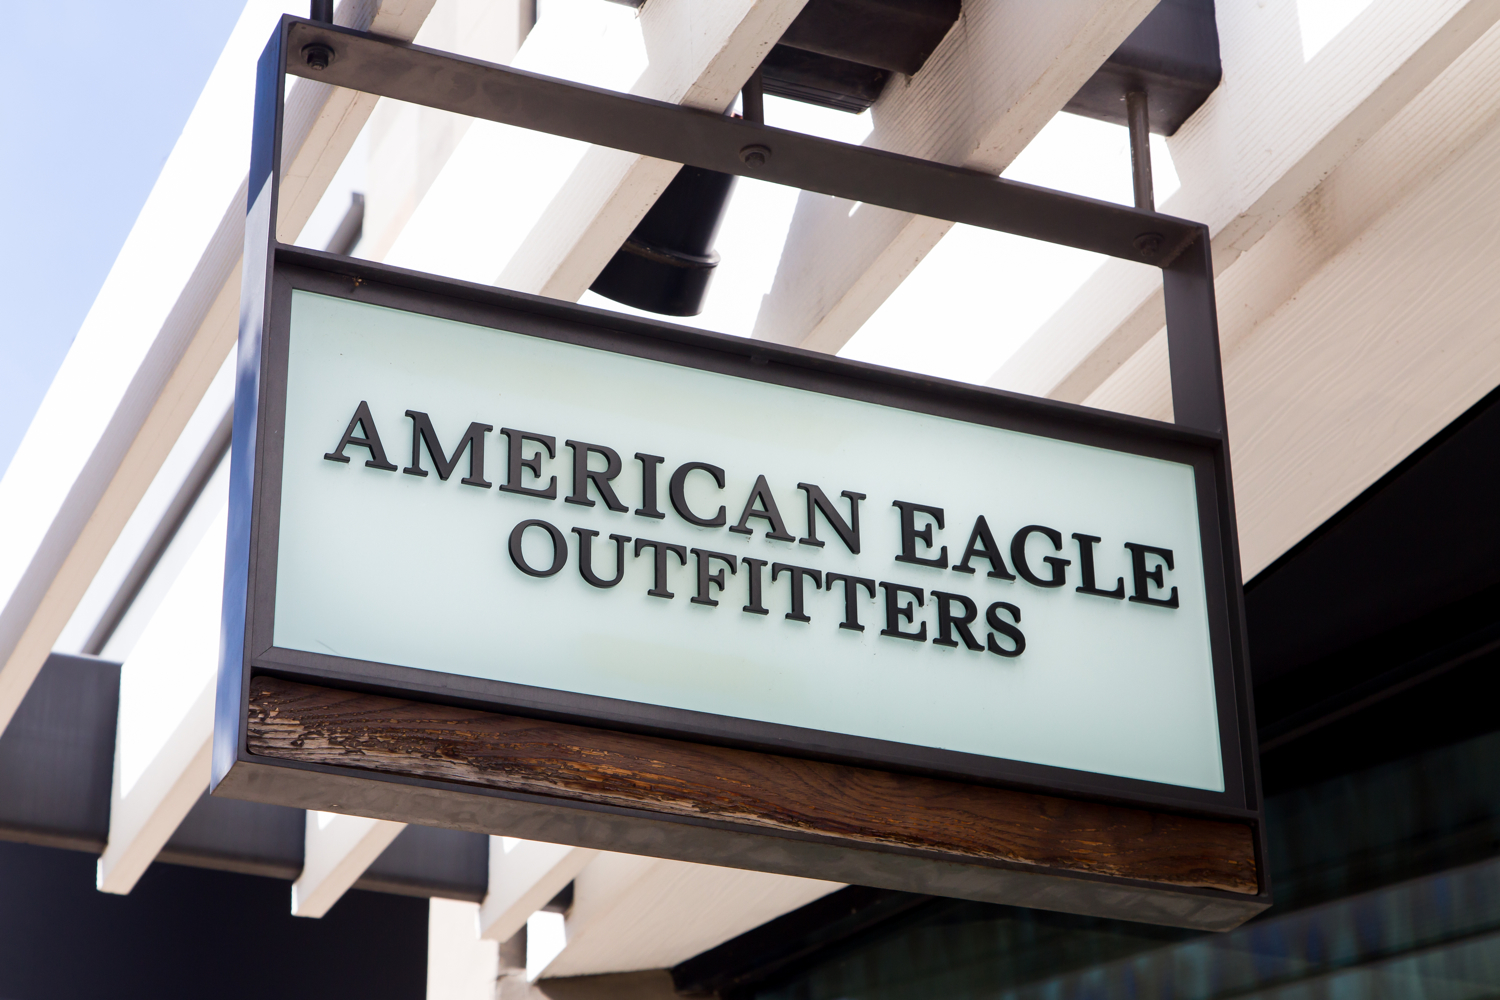 american eagle aerie photoshop ban lingerie models outfitters sign